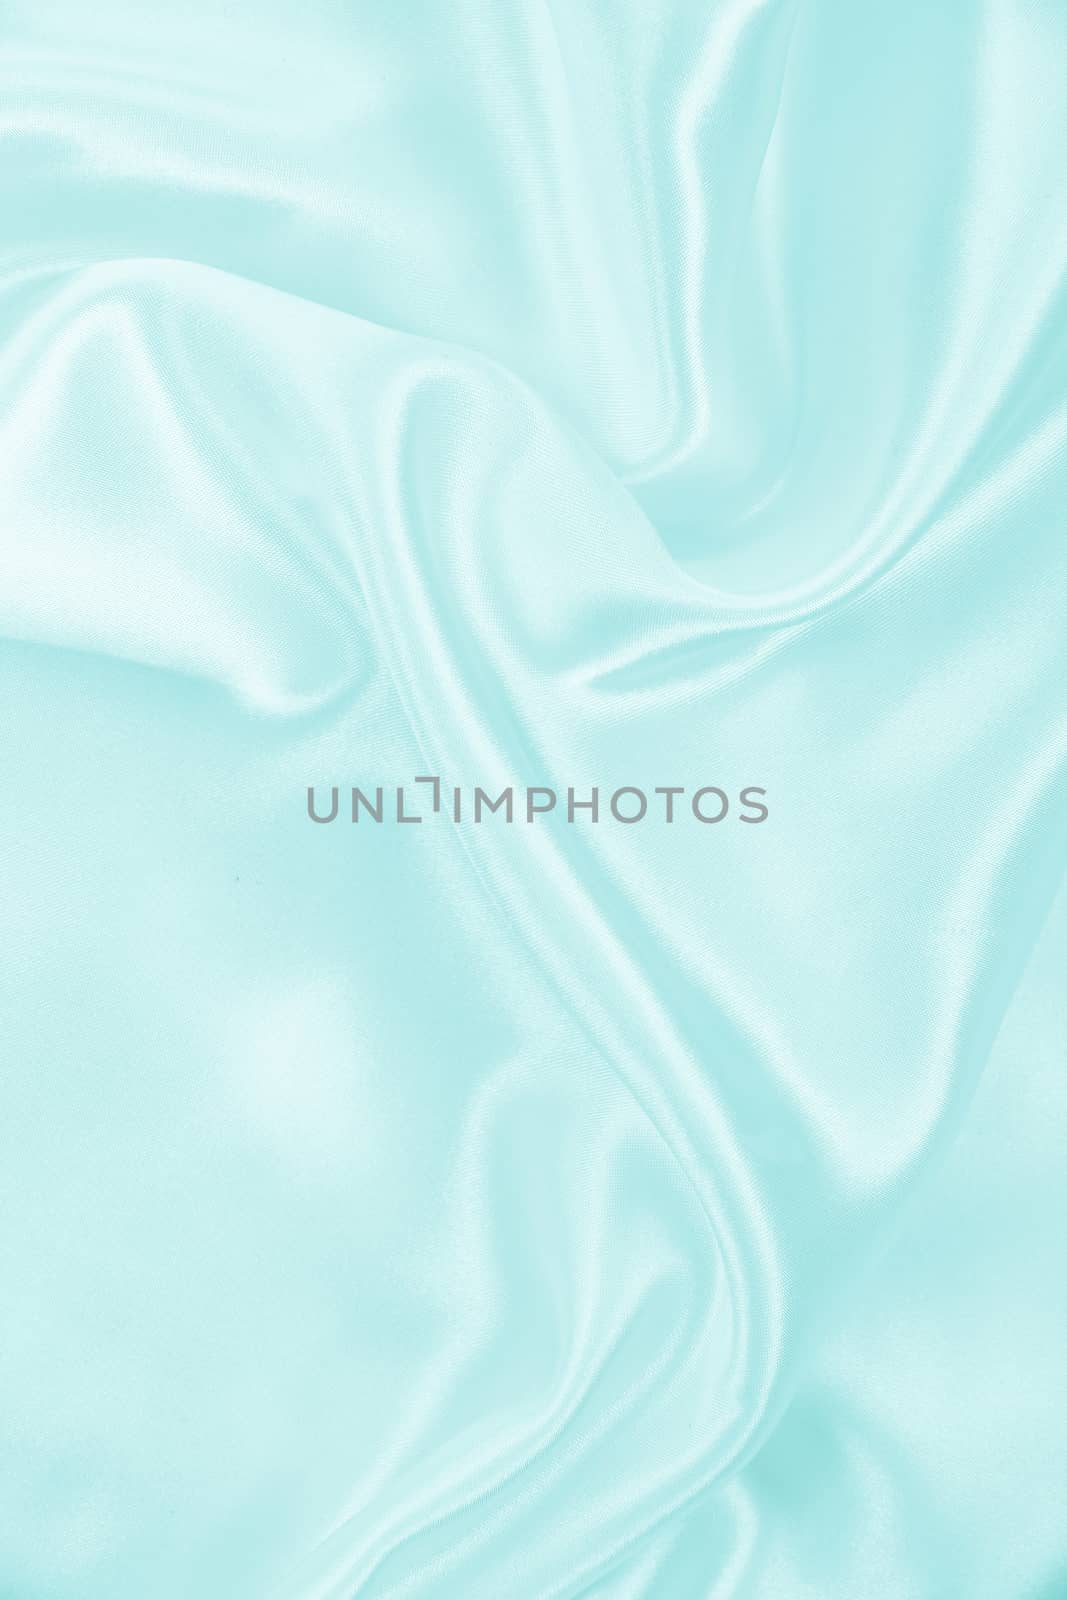 Smooth elegant blue silk or satin texture as background  by oxanatravel